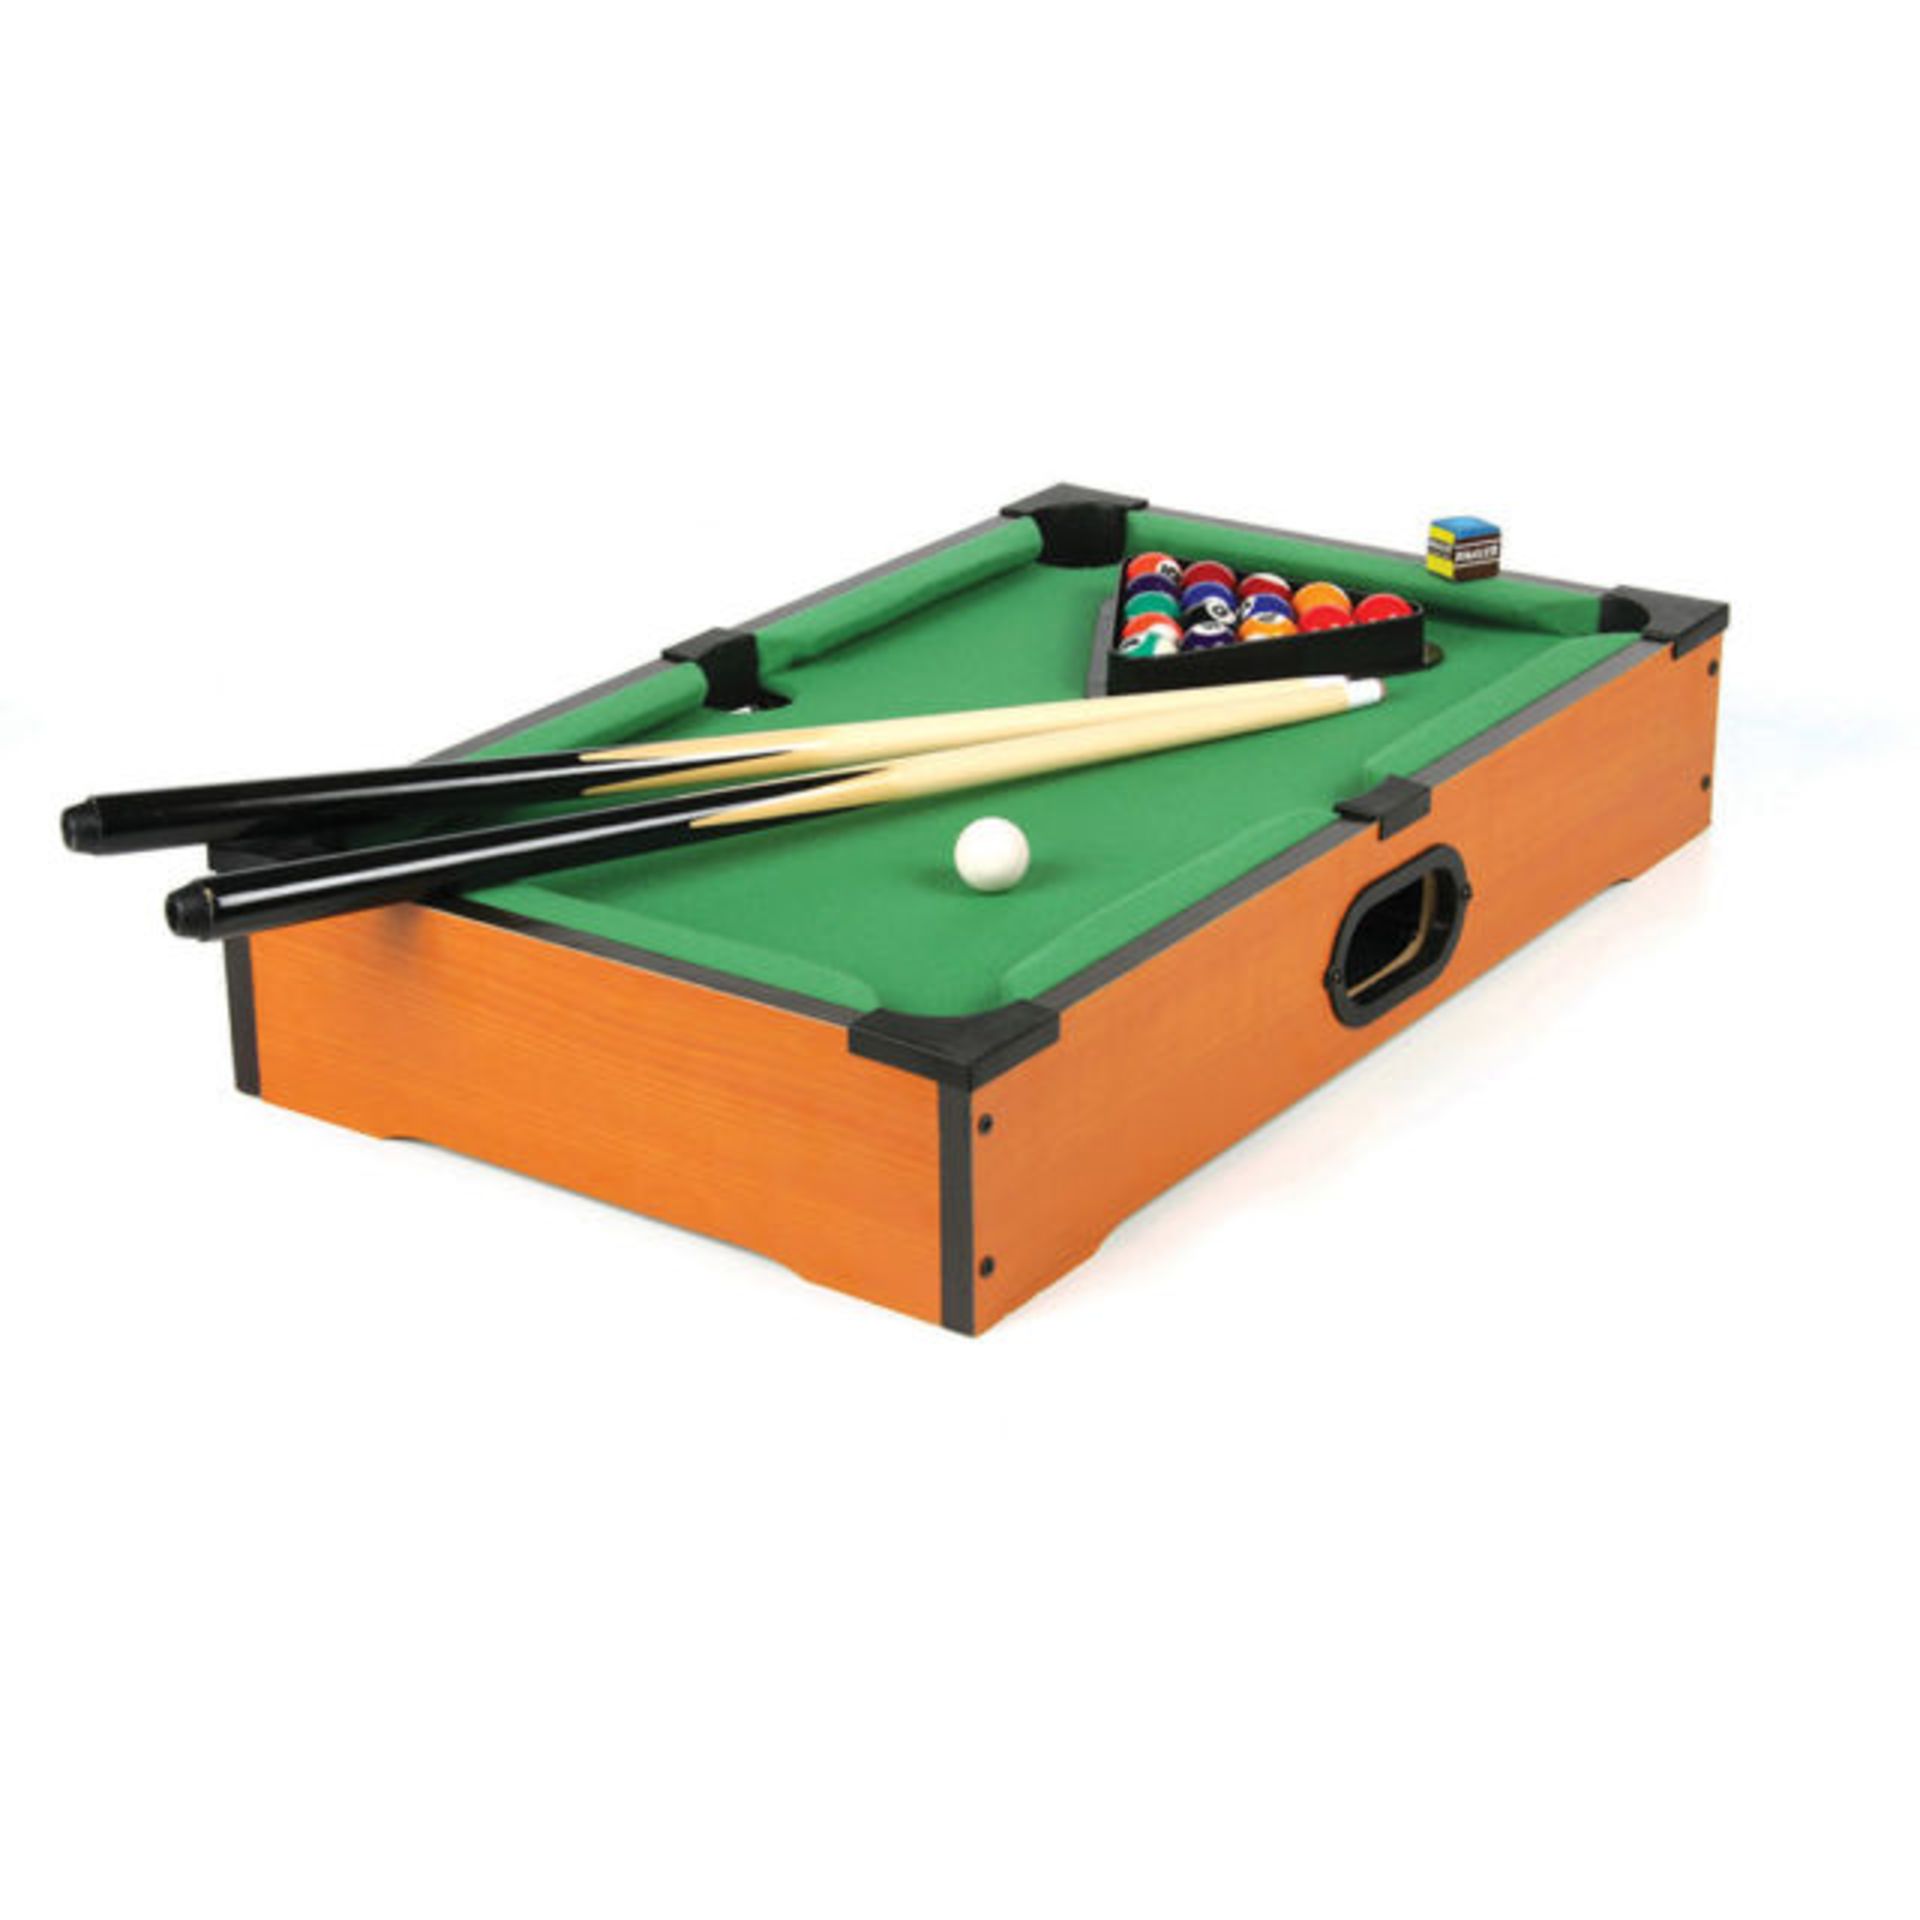 V Brand New Table Top Pool Inc Table, 15 Coloured & Numbered Balls, 2 Pool Cue Sticks and Chalk Pack